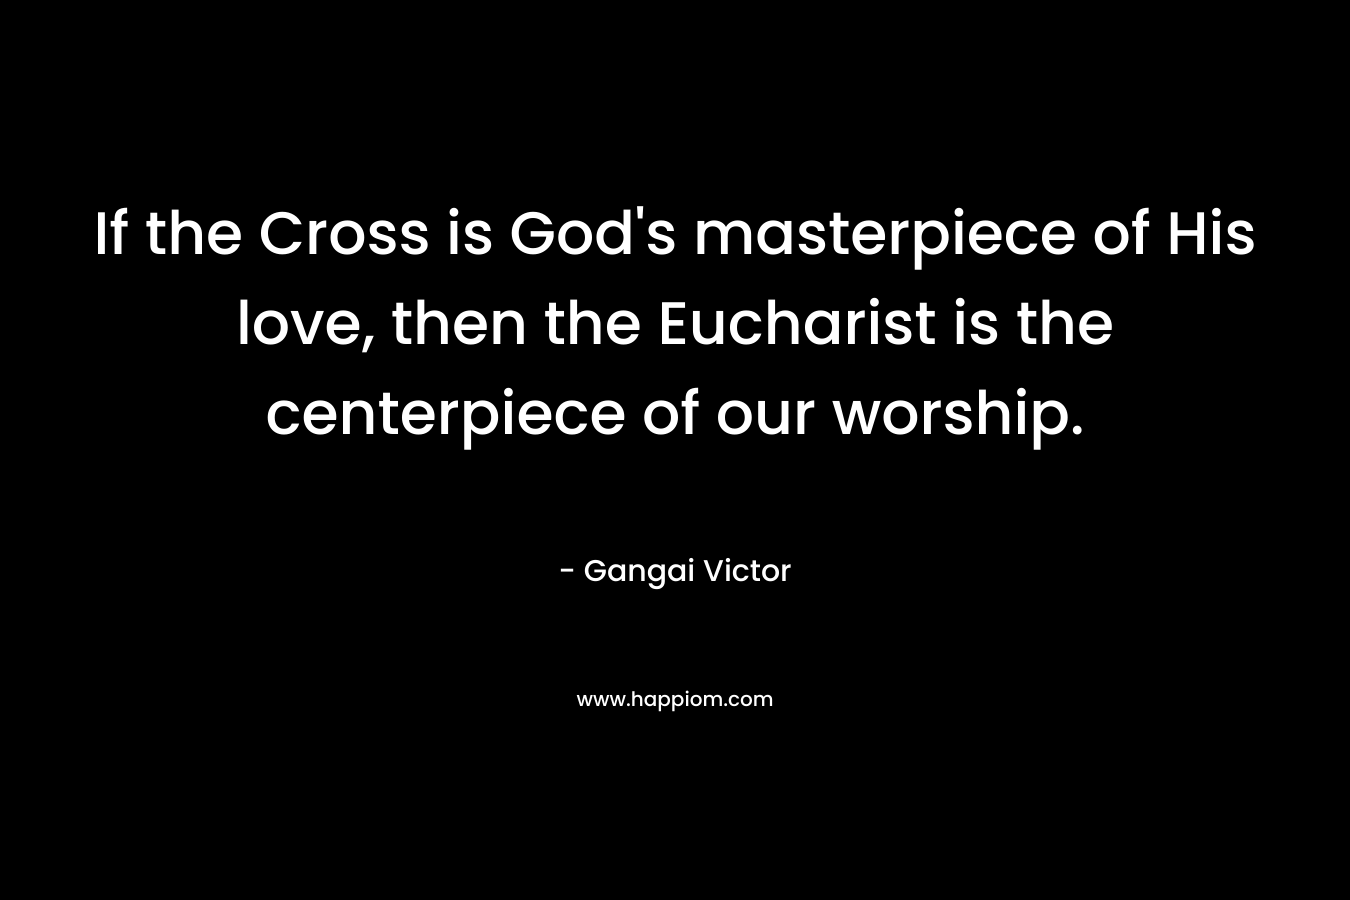 If the Cross is God's masterpiece of His love, then the Eucharist is the centerpiece of our worship.